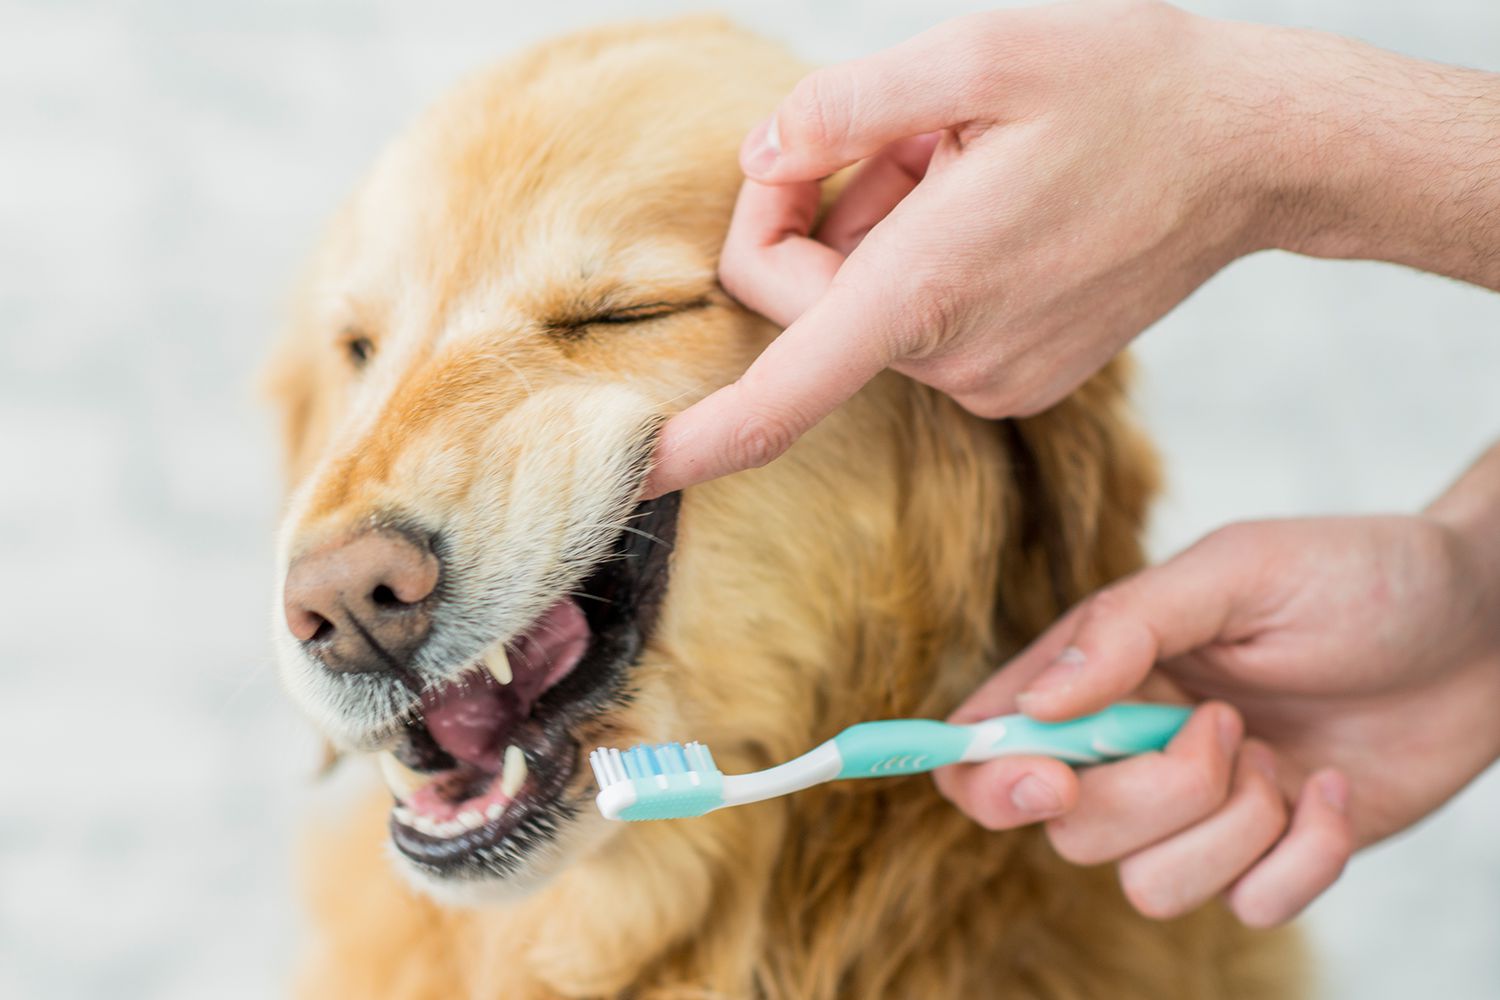 cleaning dog's teeth with toothbrush